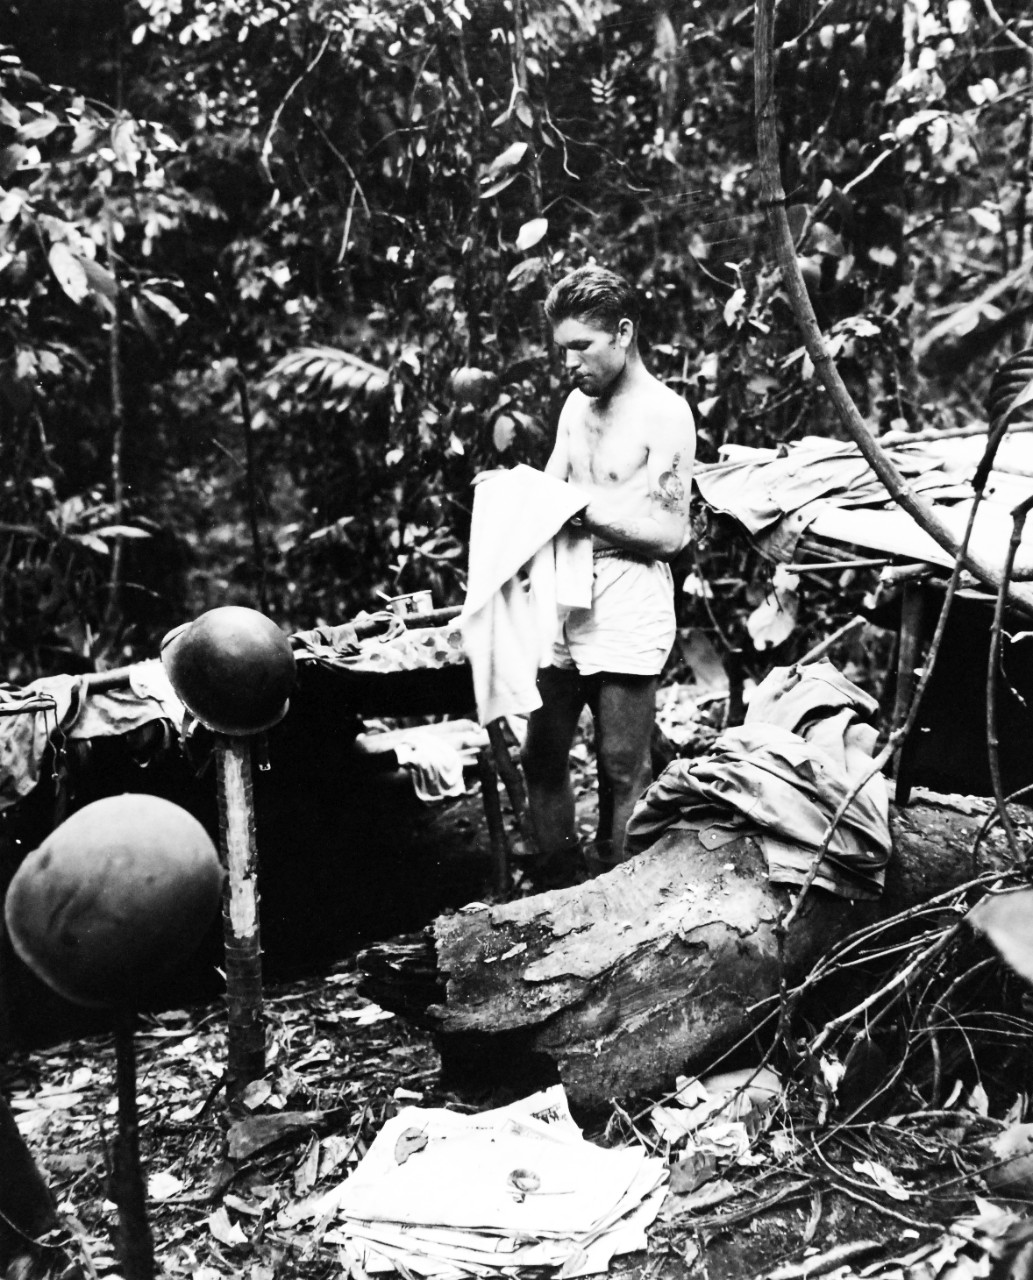 80-G-205289:  Bougainville Campaign, November 1943- August 1945.  Platoon Sergeant Ned T. Perry, USMC, cleans up during a lull between battles on Marine beachhead in northern Solomons.  Note typical Bougainville foxholes to left and right, covered to keep heavy rains out, and the dense under-growth behind.  Photograph released December 30, 1943.   Official U.S. Navy Photograph, now in the collections of the National Archives.  (2017/07/11).  